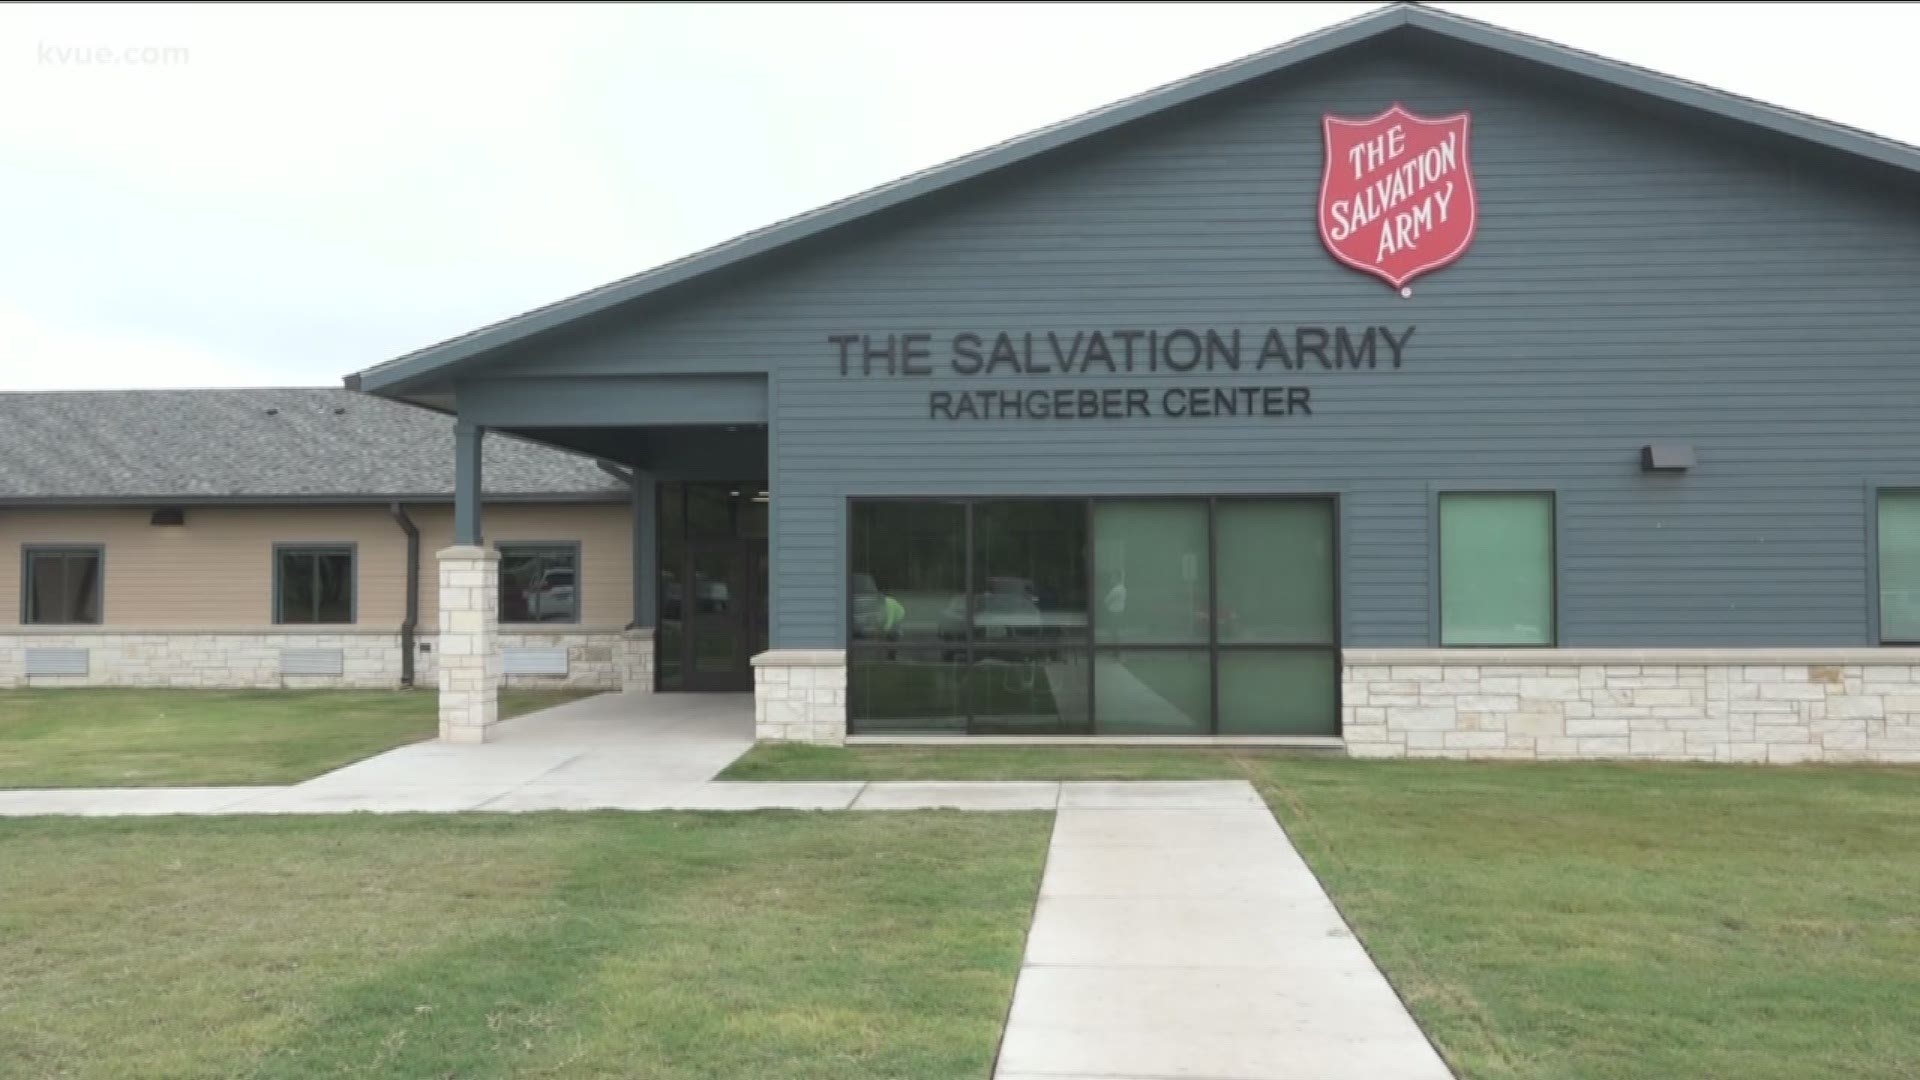 The Salvation Army will host a ribbon cutting ceremony at their brand new center in East Austin.